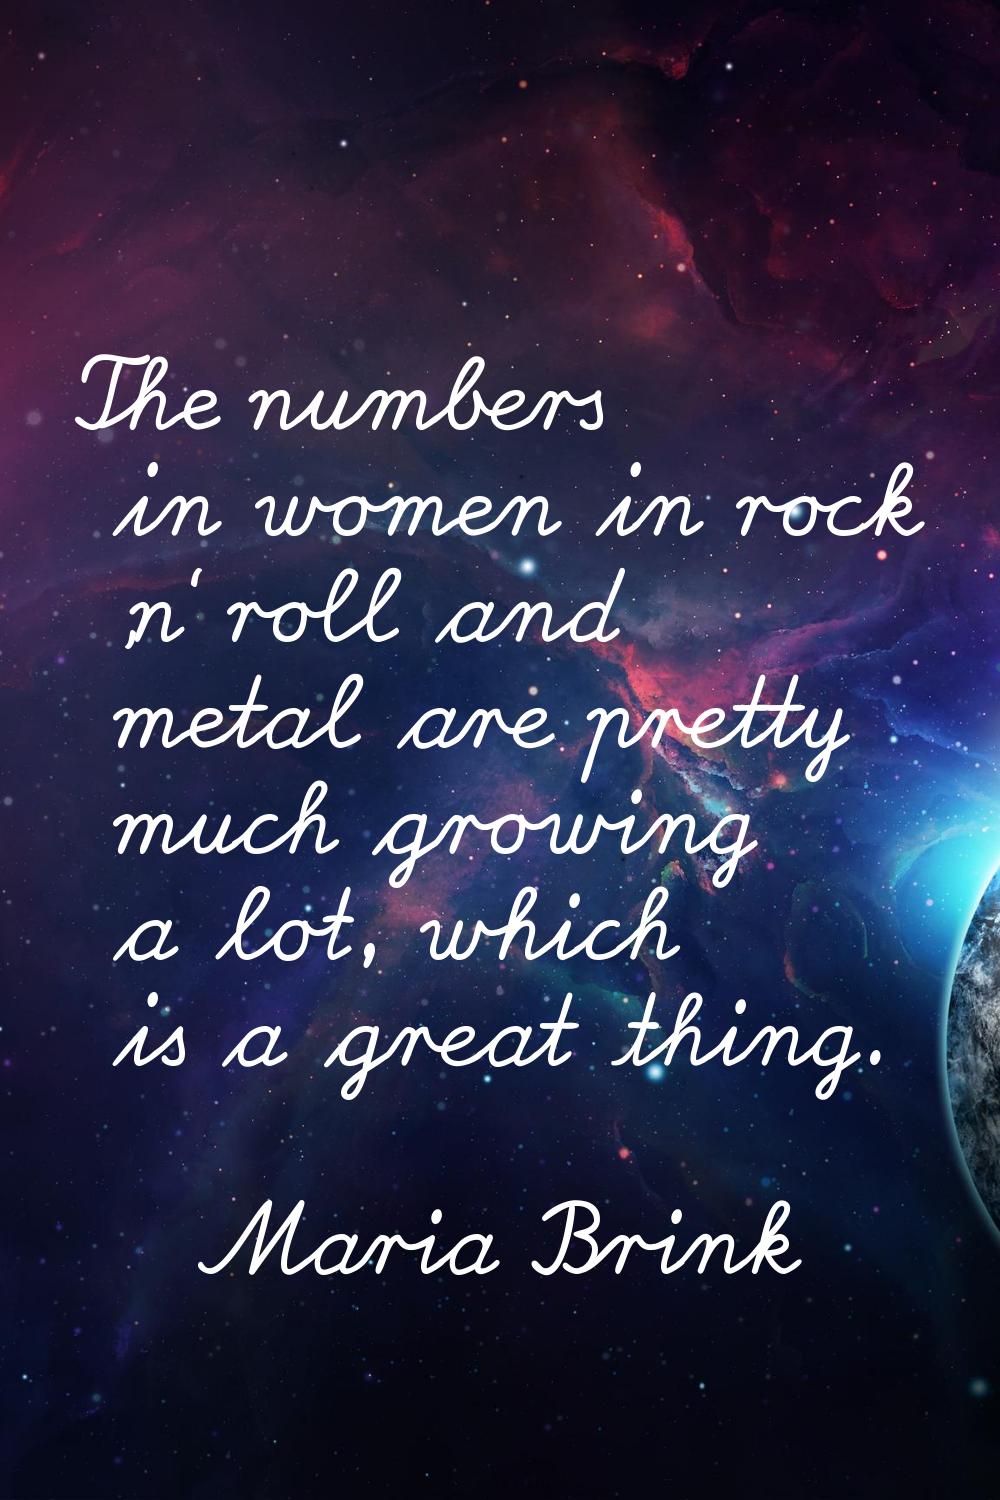 The numbers in women in rock 'n' roll and metal are pretty much growing a lot, which is a great thi